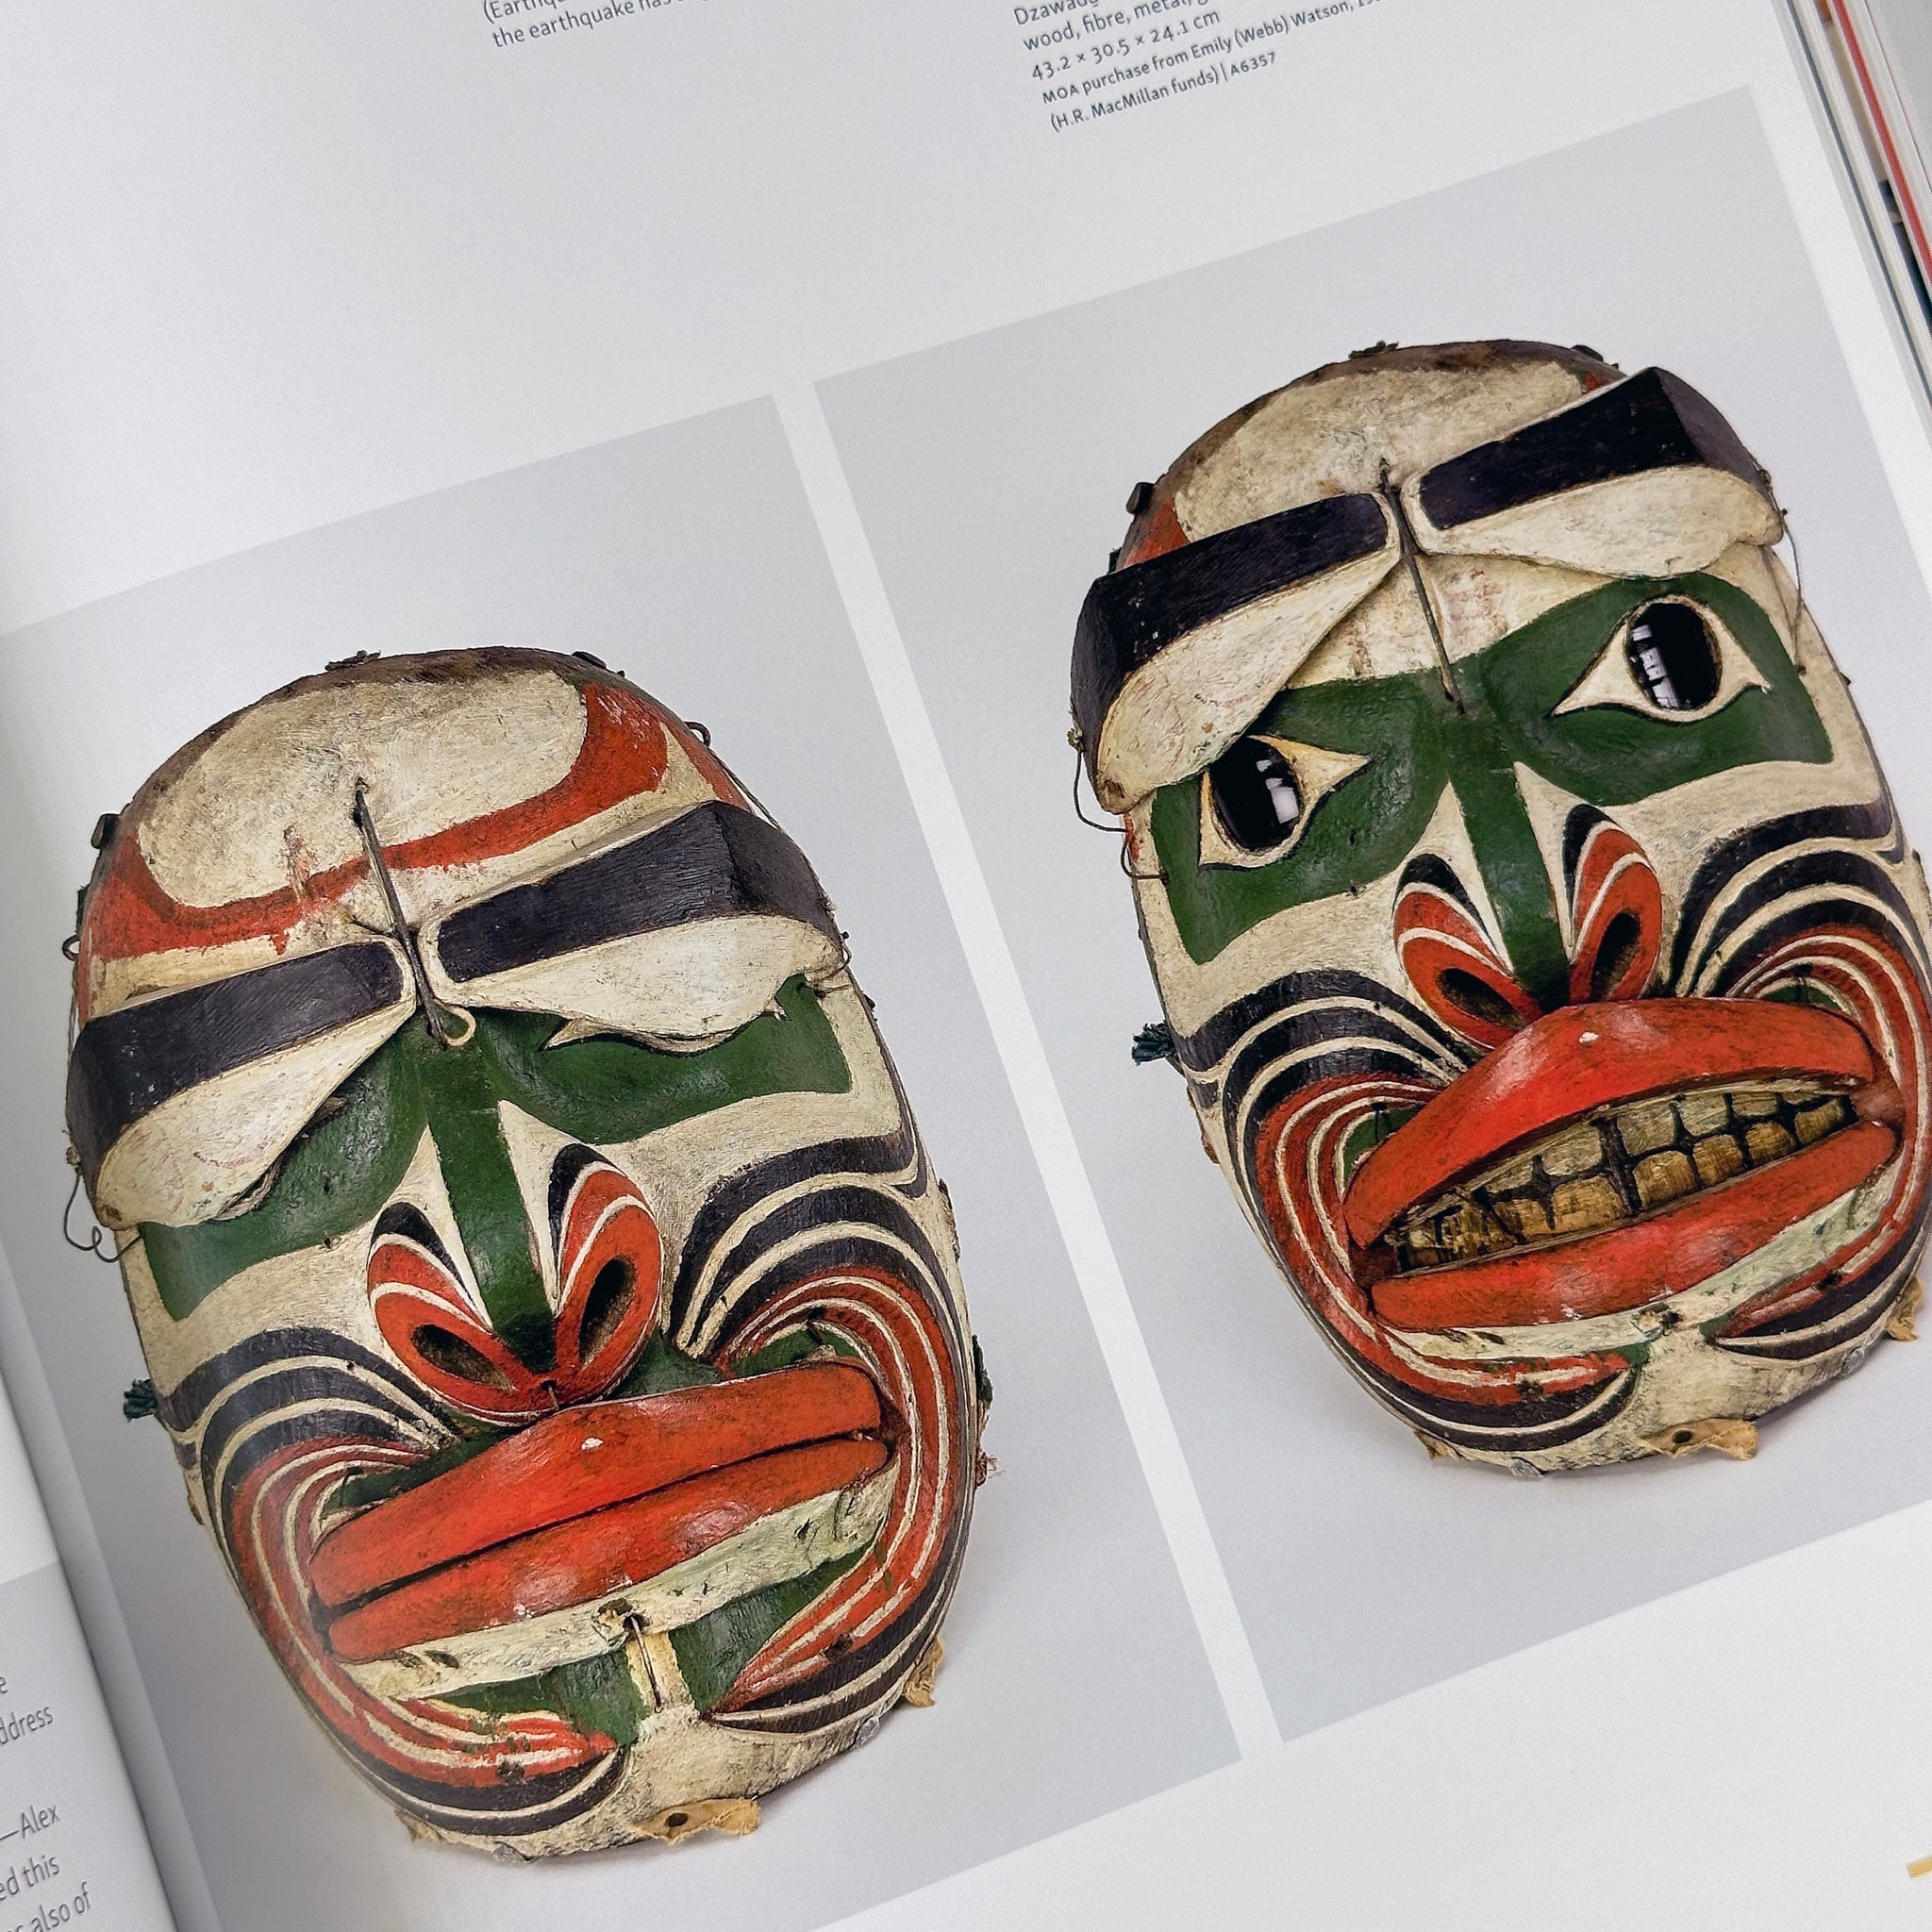 Where the Power Is: Indigenous Perspectives on Northwest Coast Art